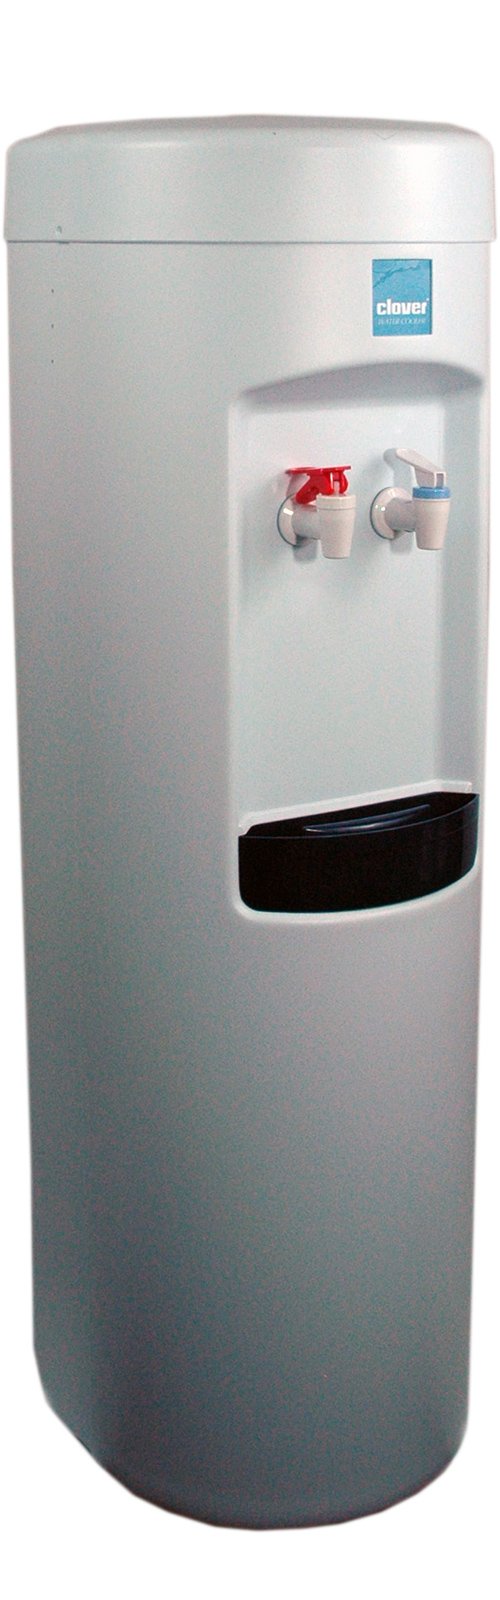 Clover D7A Hot and Cold Bottleless Water Dispenser with Install Kit and Filter White